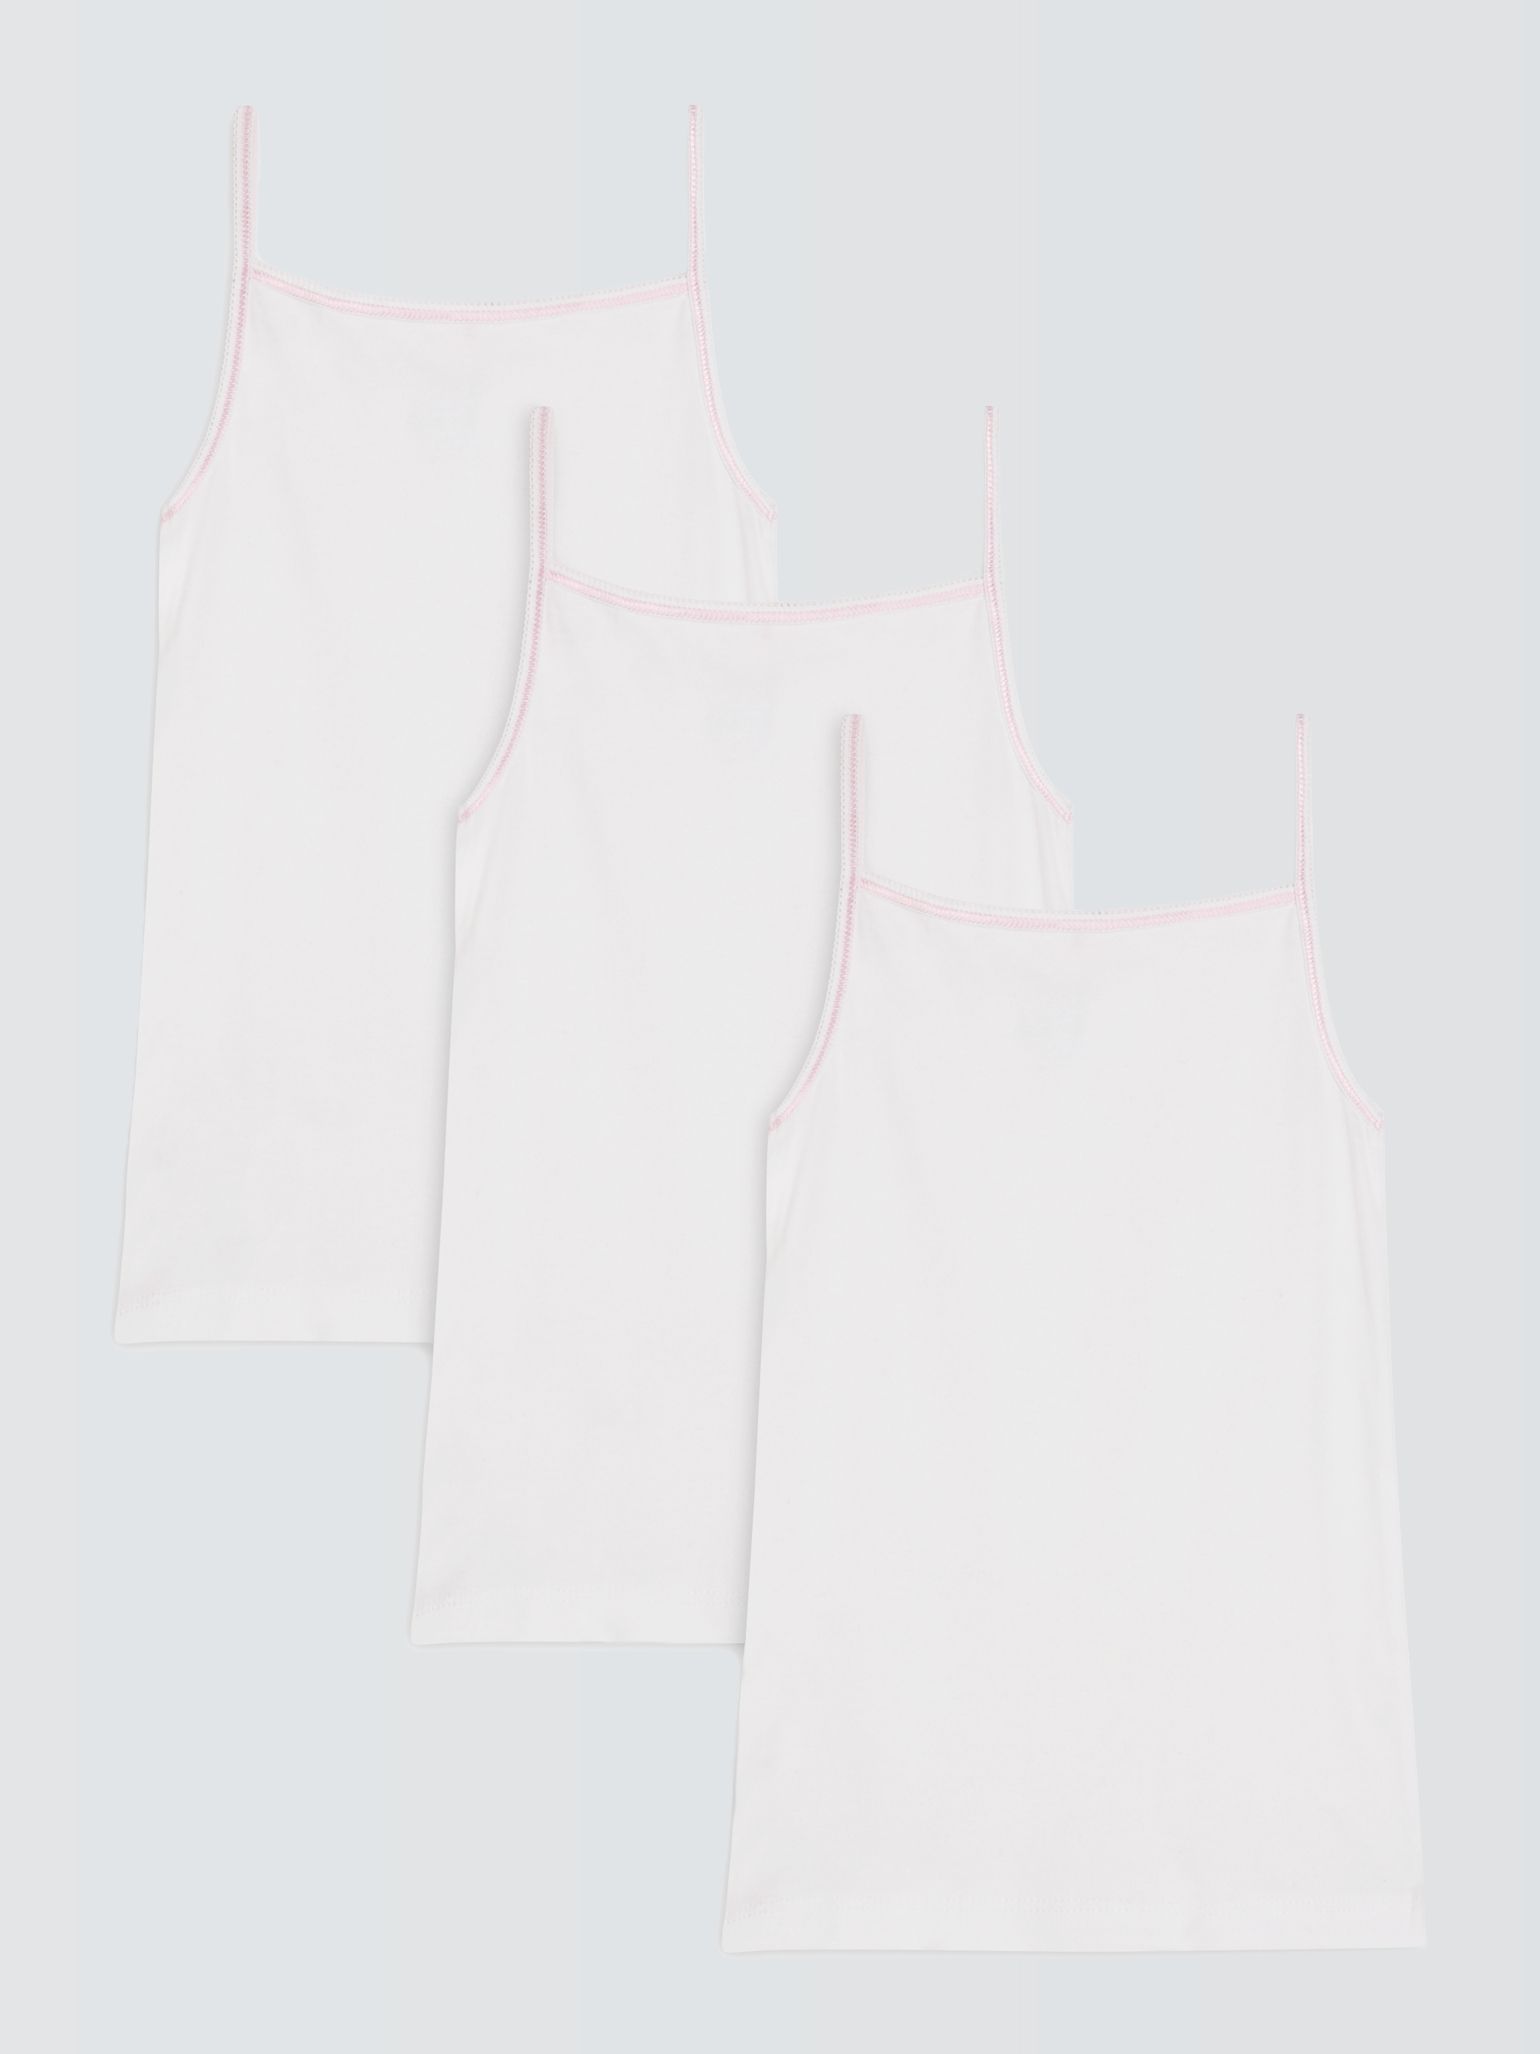 John Lewis Kids' Embroidered Edge Camisole Vests, Pack of 3, White, 2 years